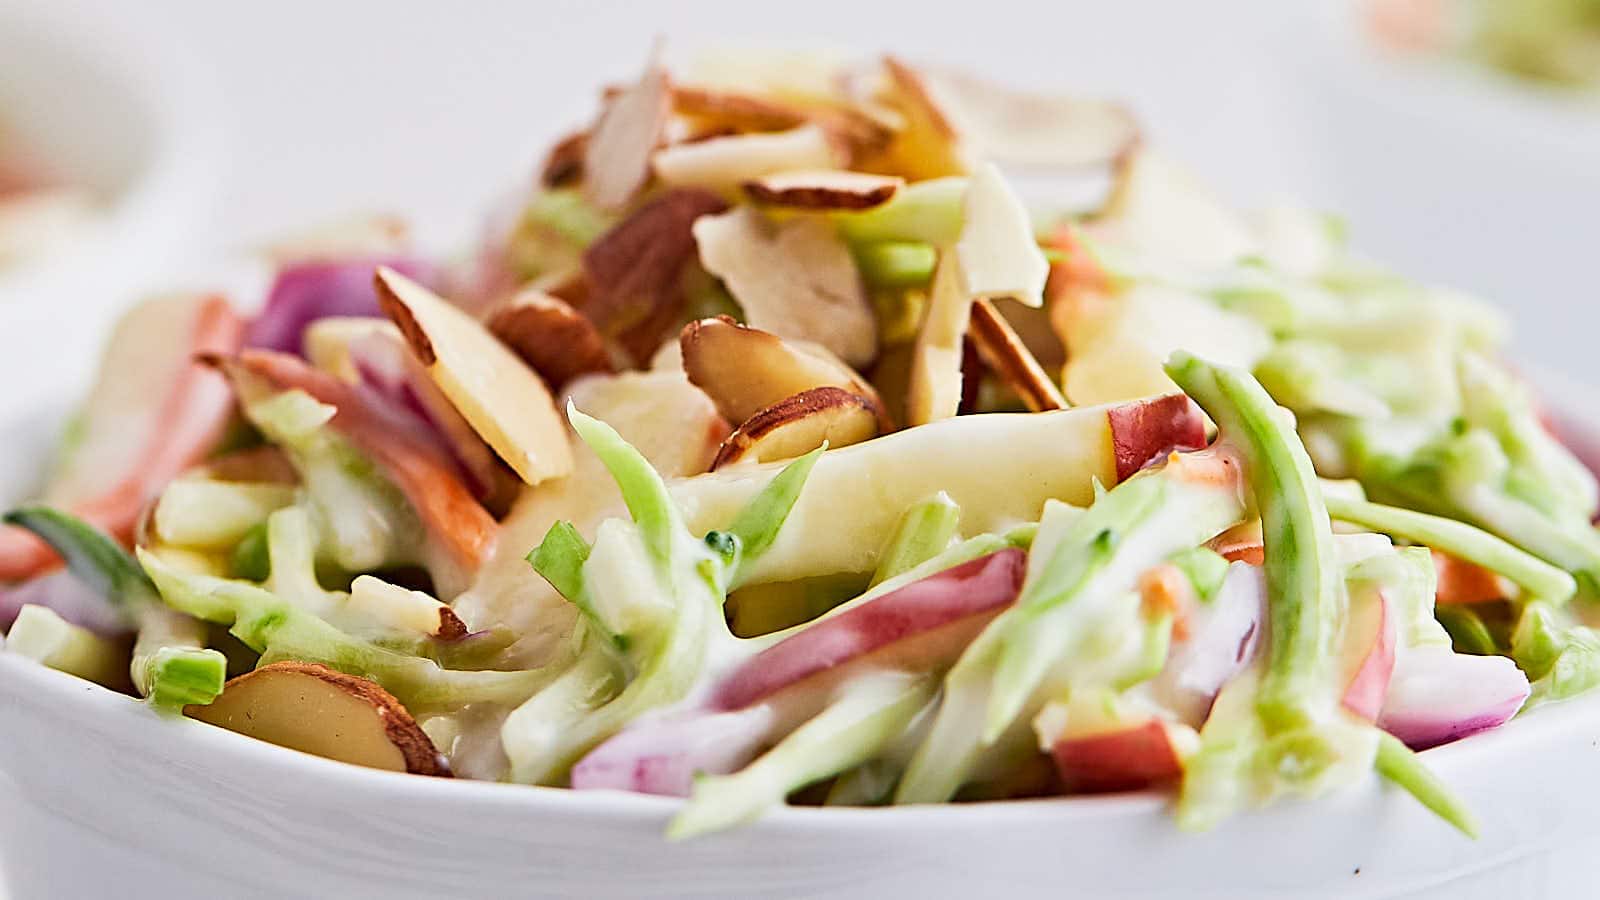 Creamy Broccoli Slaw with Apples and Almonds - Cheerful Cook